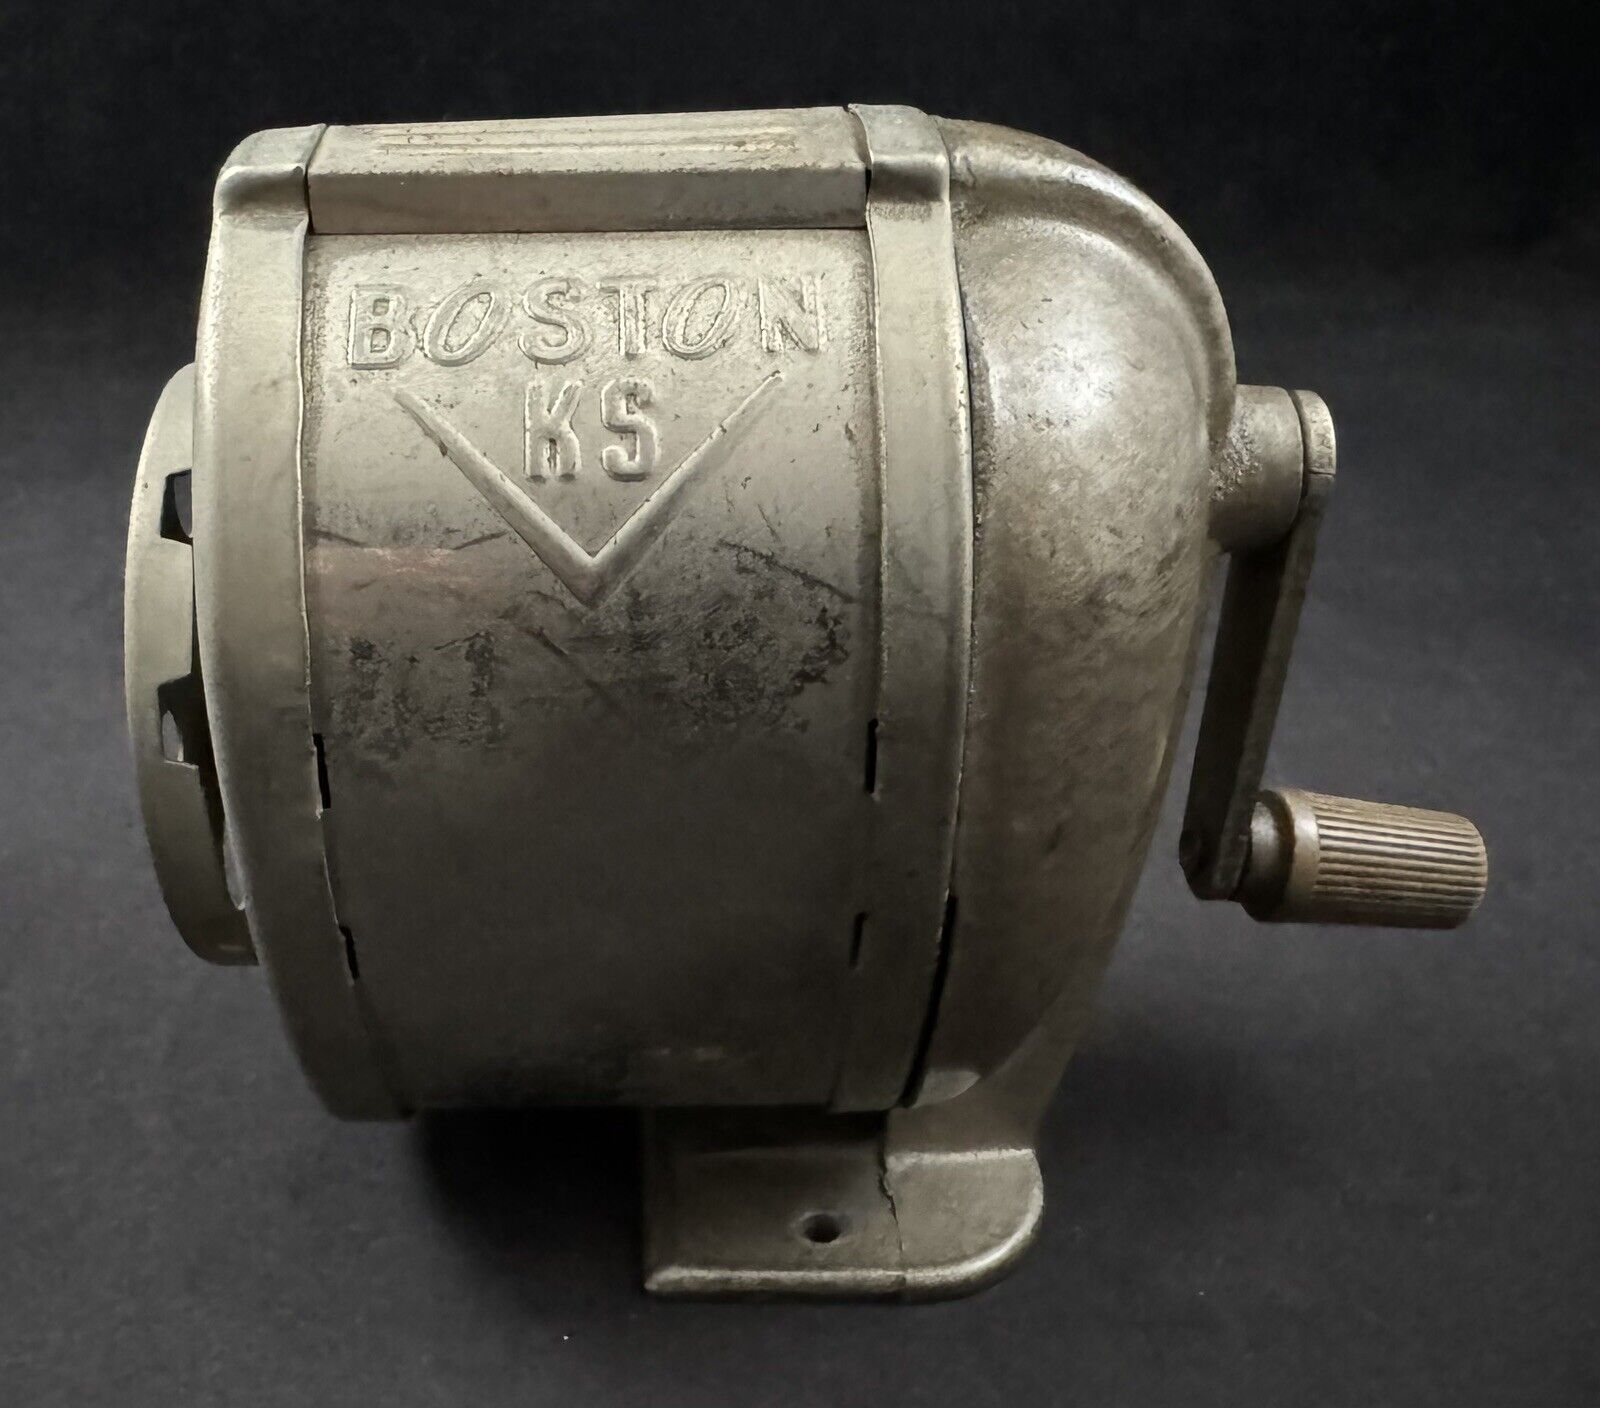 Vintage Boston KS Wall/Table Mount Silver Pencil Sharpener - Made in USA